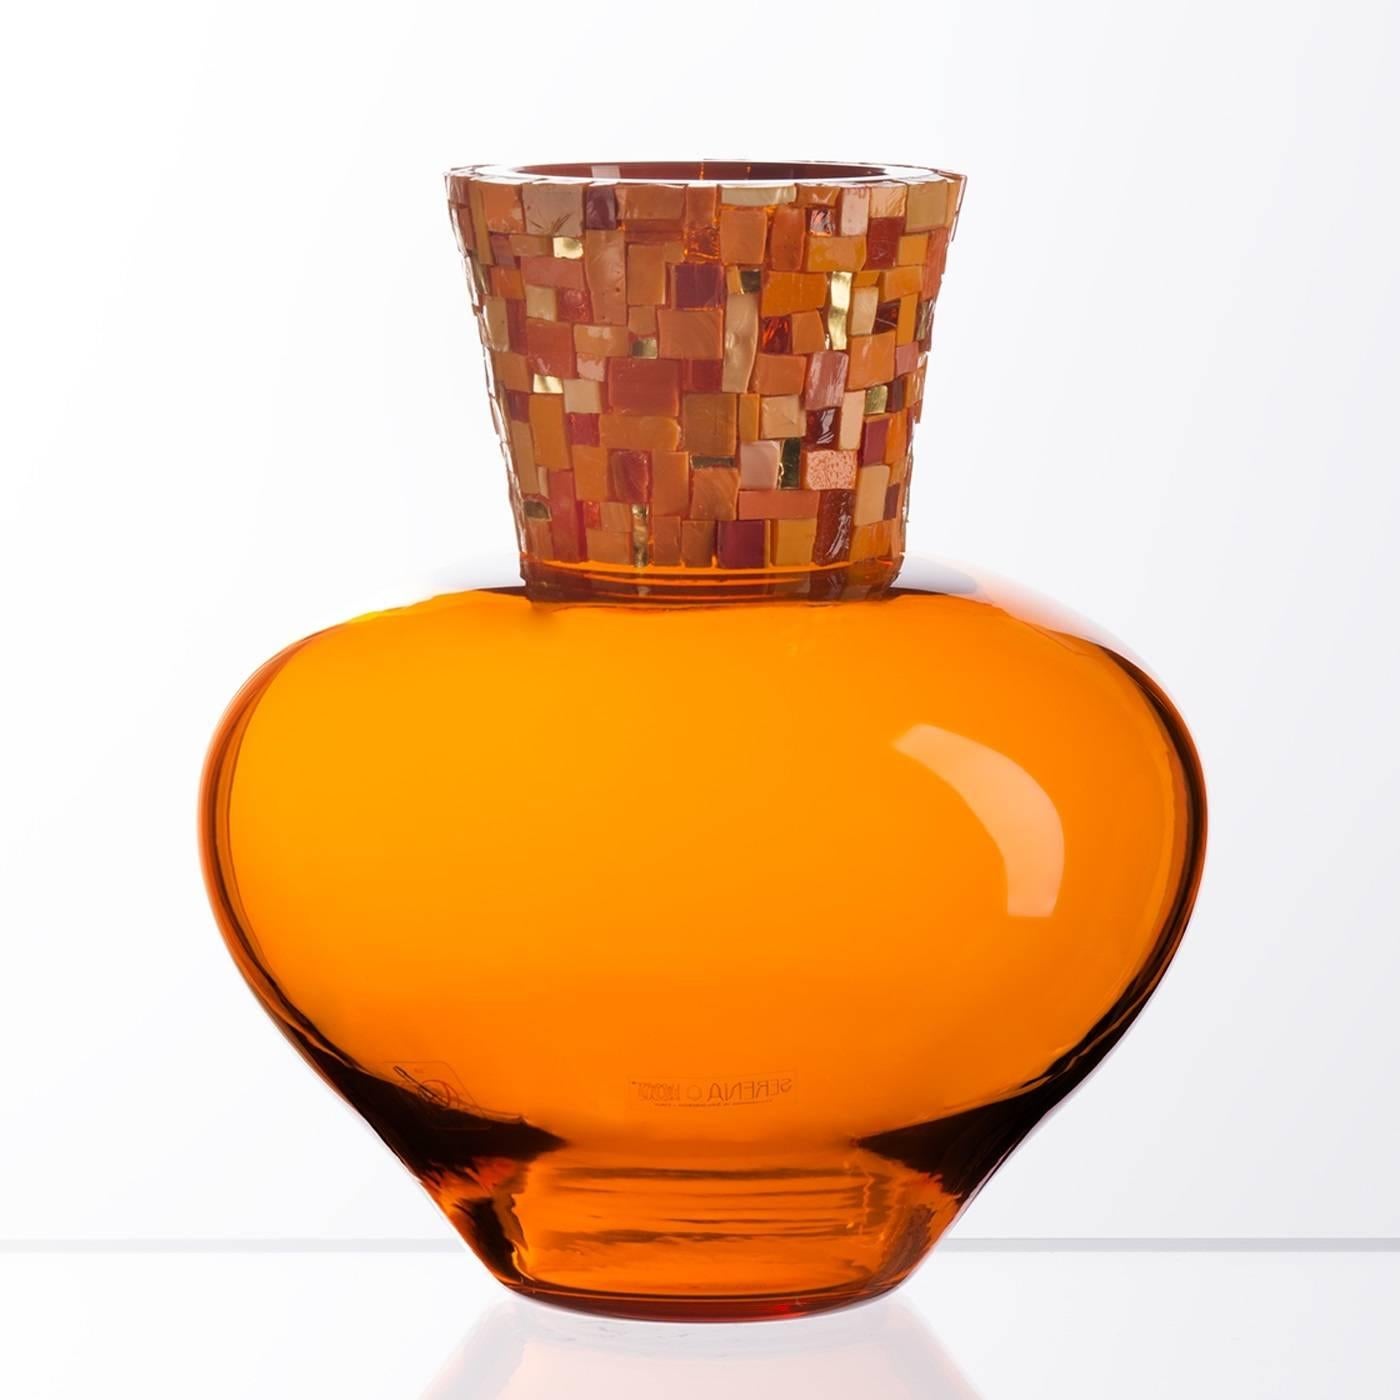 This vase showcases the craftsmanship of the Venetian master glass-blowers who use centuries-old techniques to infuse modern trends and styles into their creations. The bright mosaic detail combines precious tesserae made of gold foil with opaque